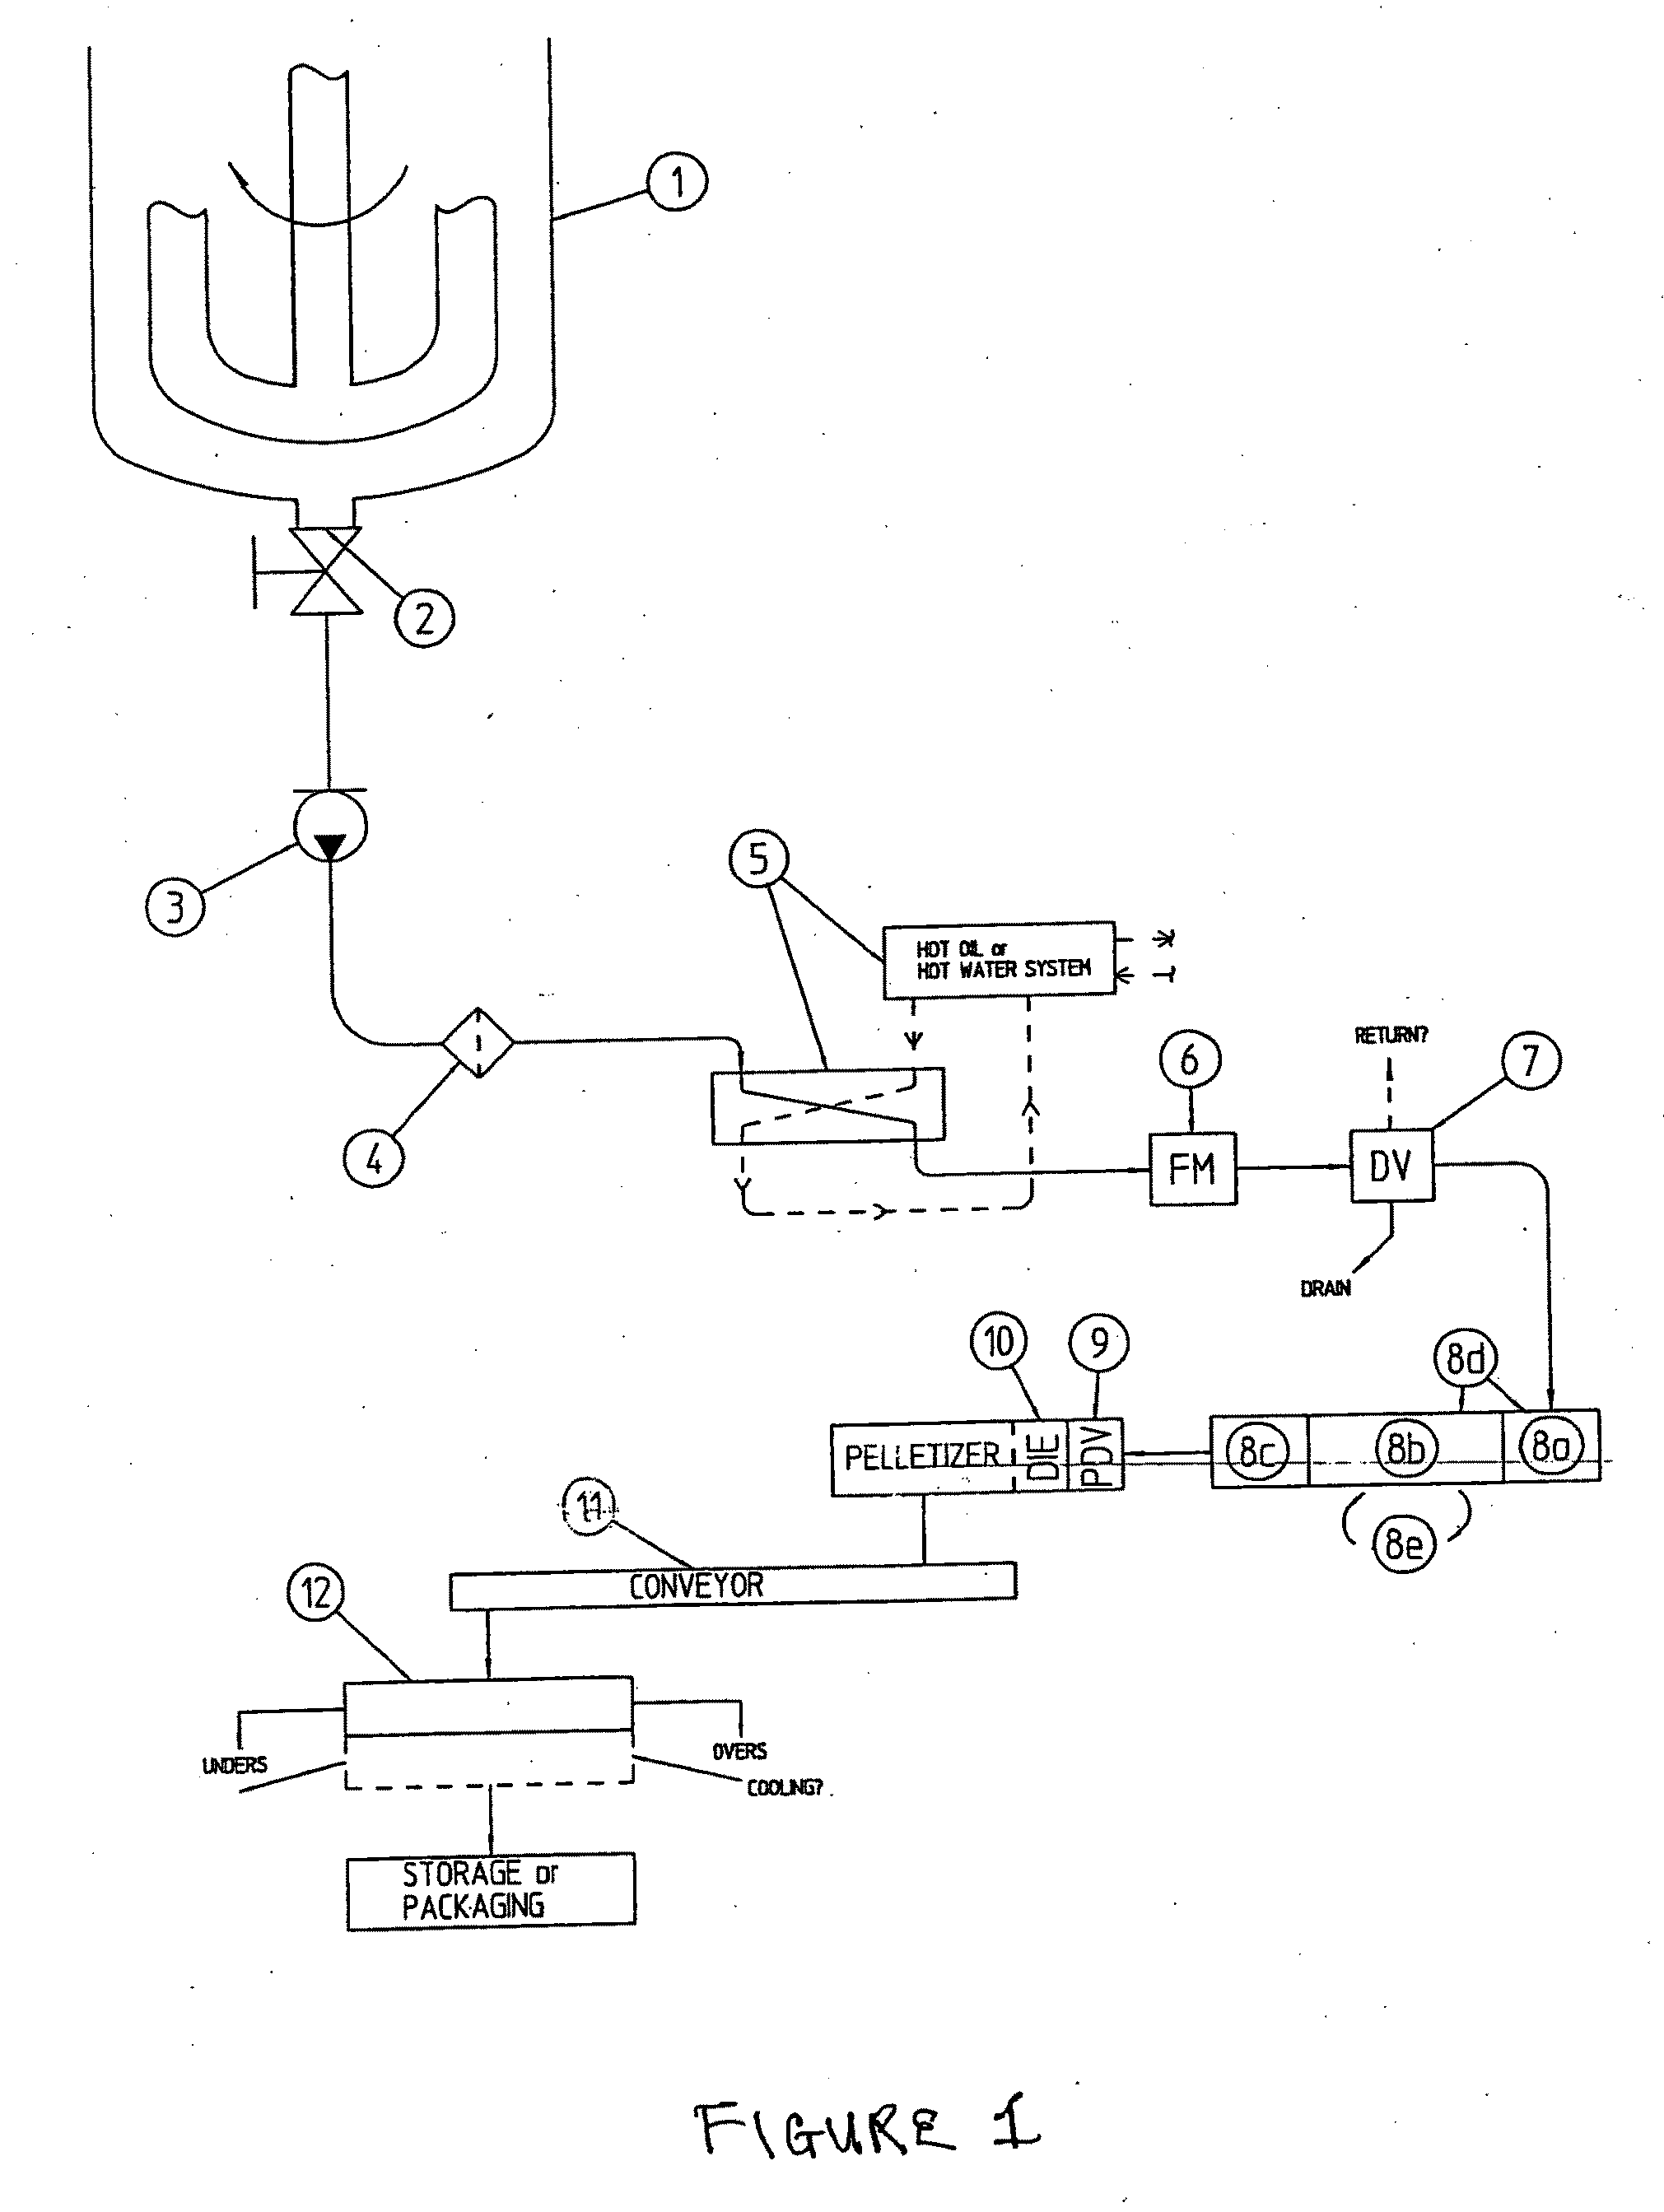 Apparatus and Method for Pelletizing Wax and Wax-Like Materials